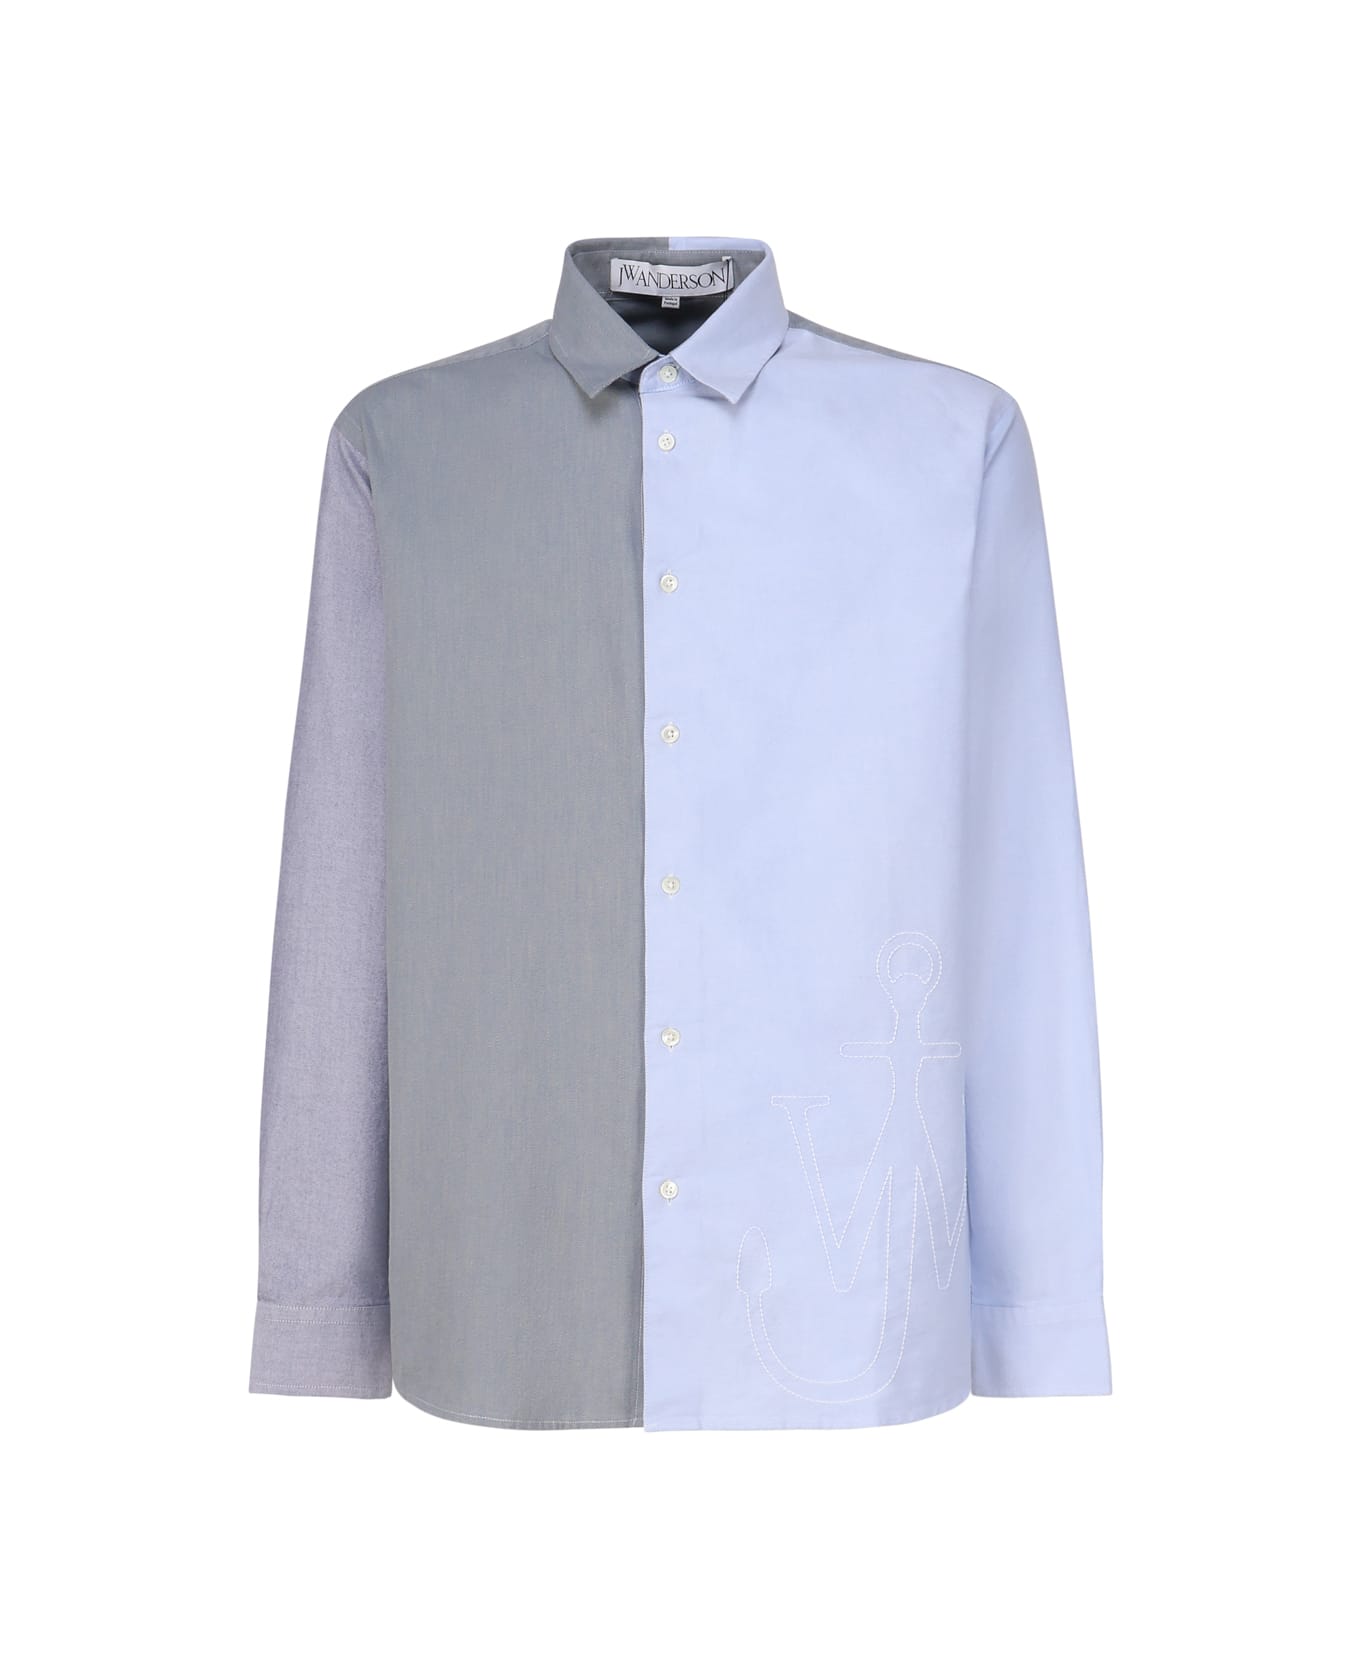 J.W. Anderson Patchwork Shirt With Anchor Embroidery - Grey, light blue シャツ